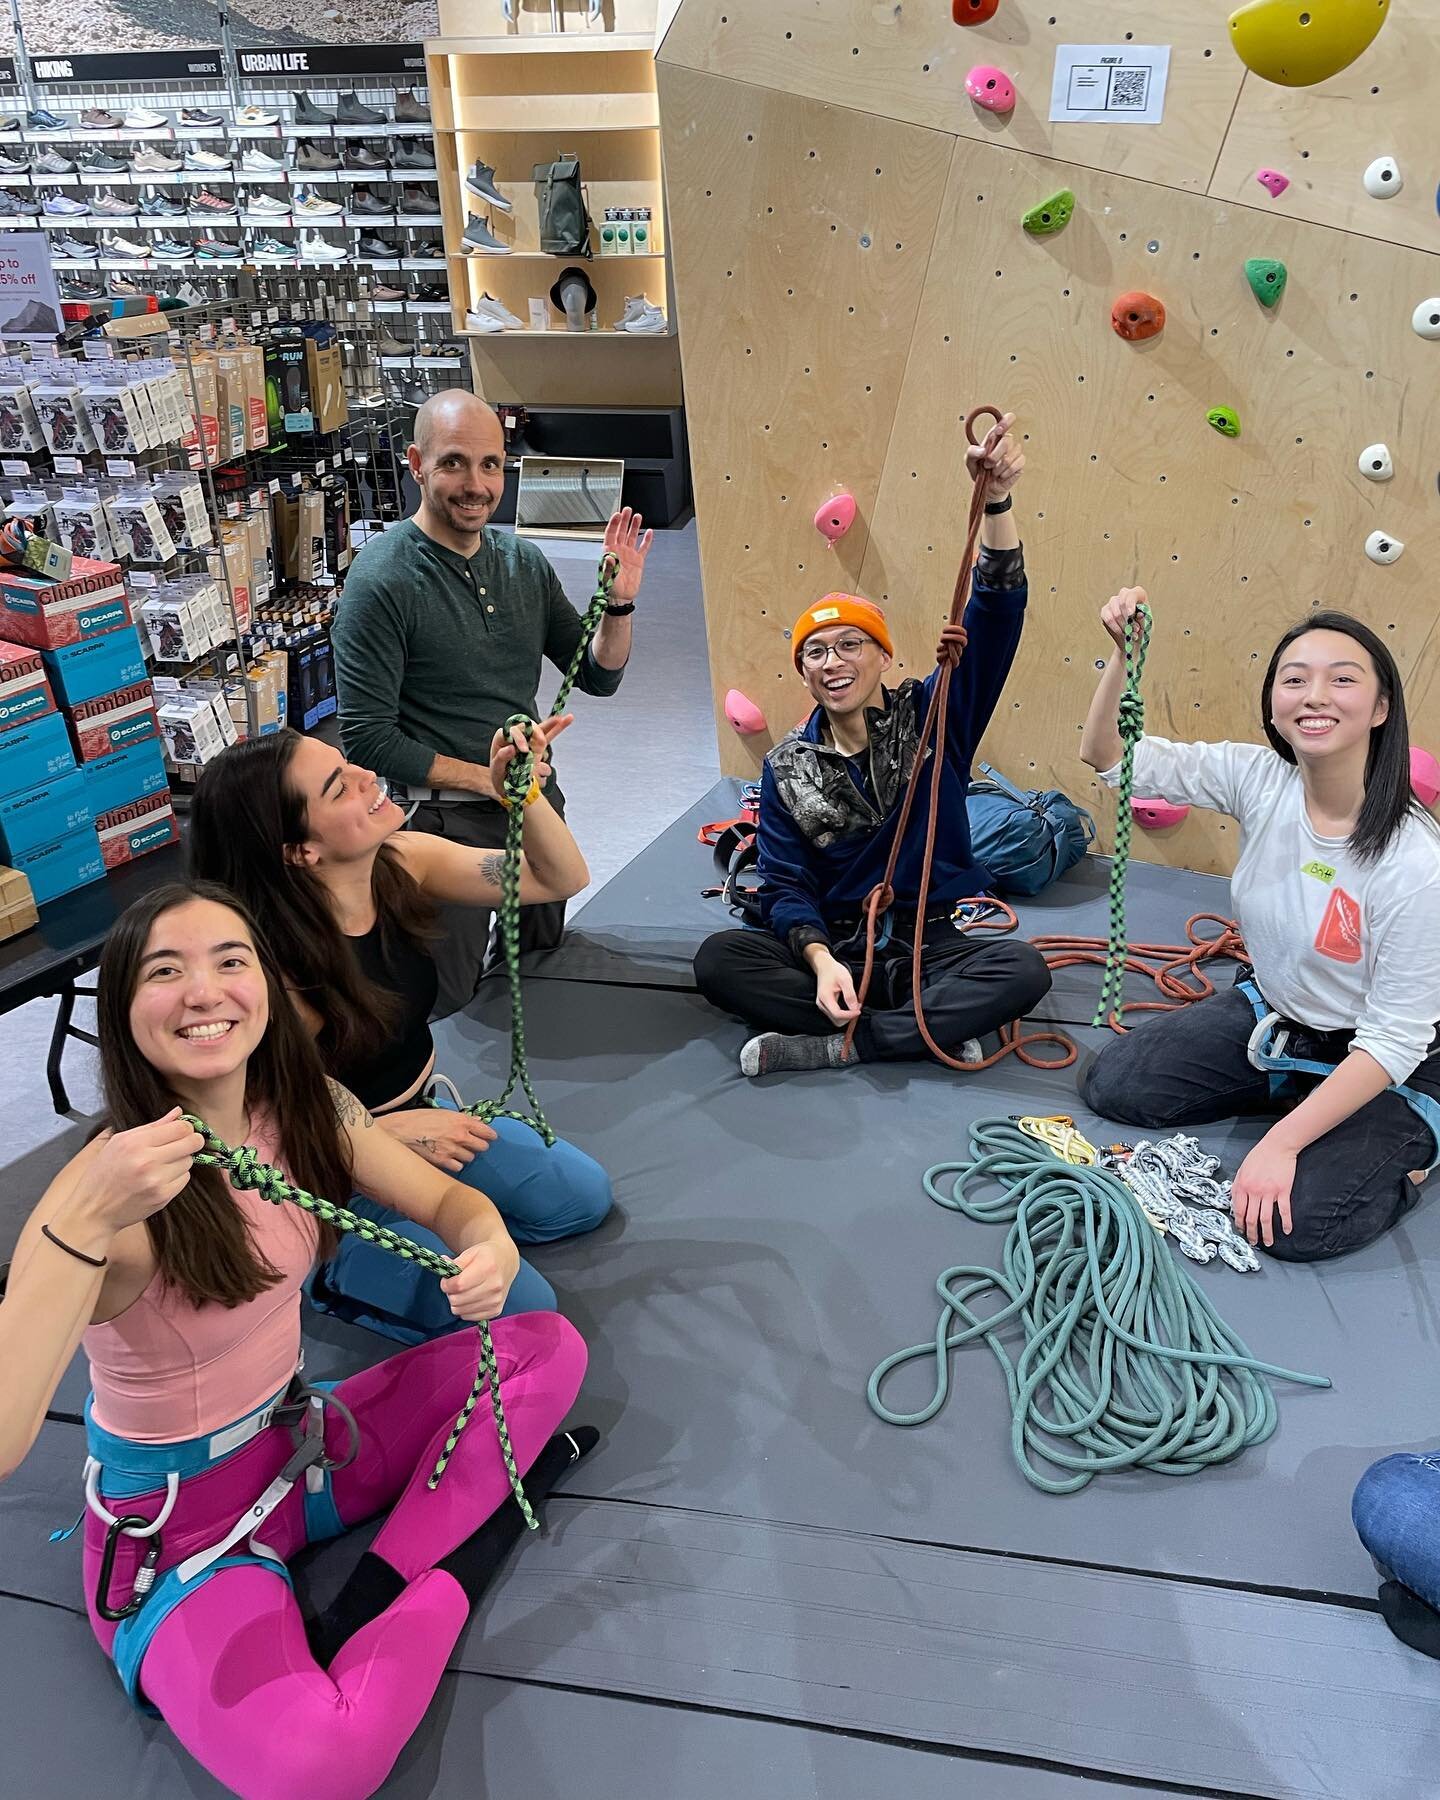 Had the best time at our knots and hitches clinic last night! Thank you to everyone who came out! 

Thanks @mec for having us! 💚

VCA is a volunteer run organization; memberships and donations help to support our work (such as educational clinics li